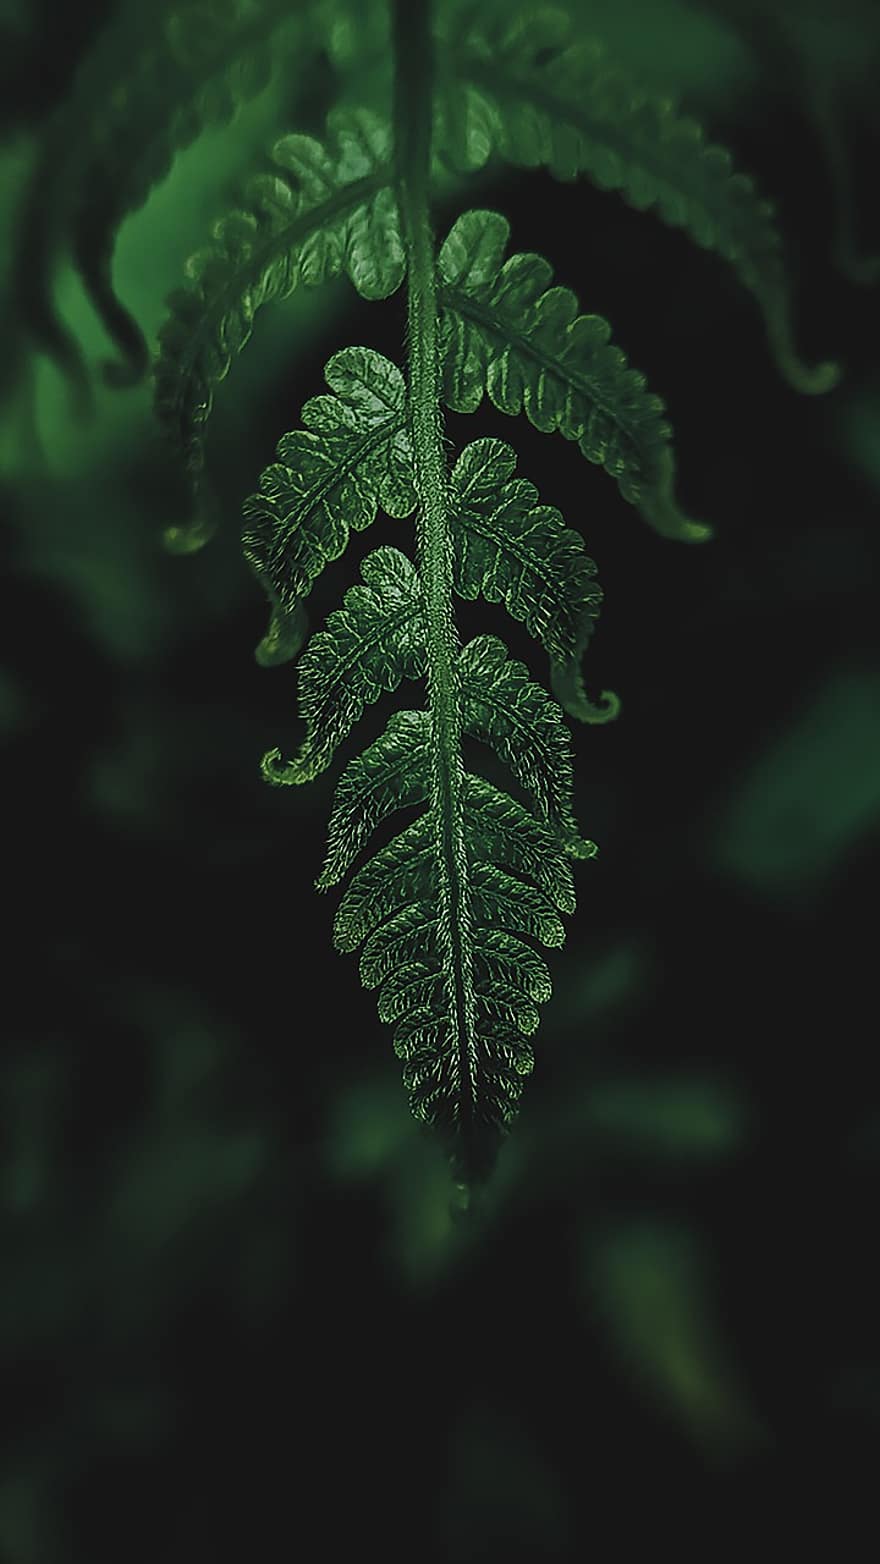 fern, leaves, plant, leaf, green color, close-up, macro, growth, forest, backgrounds, freshness